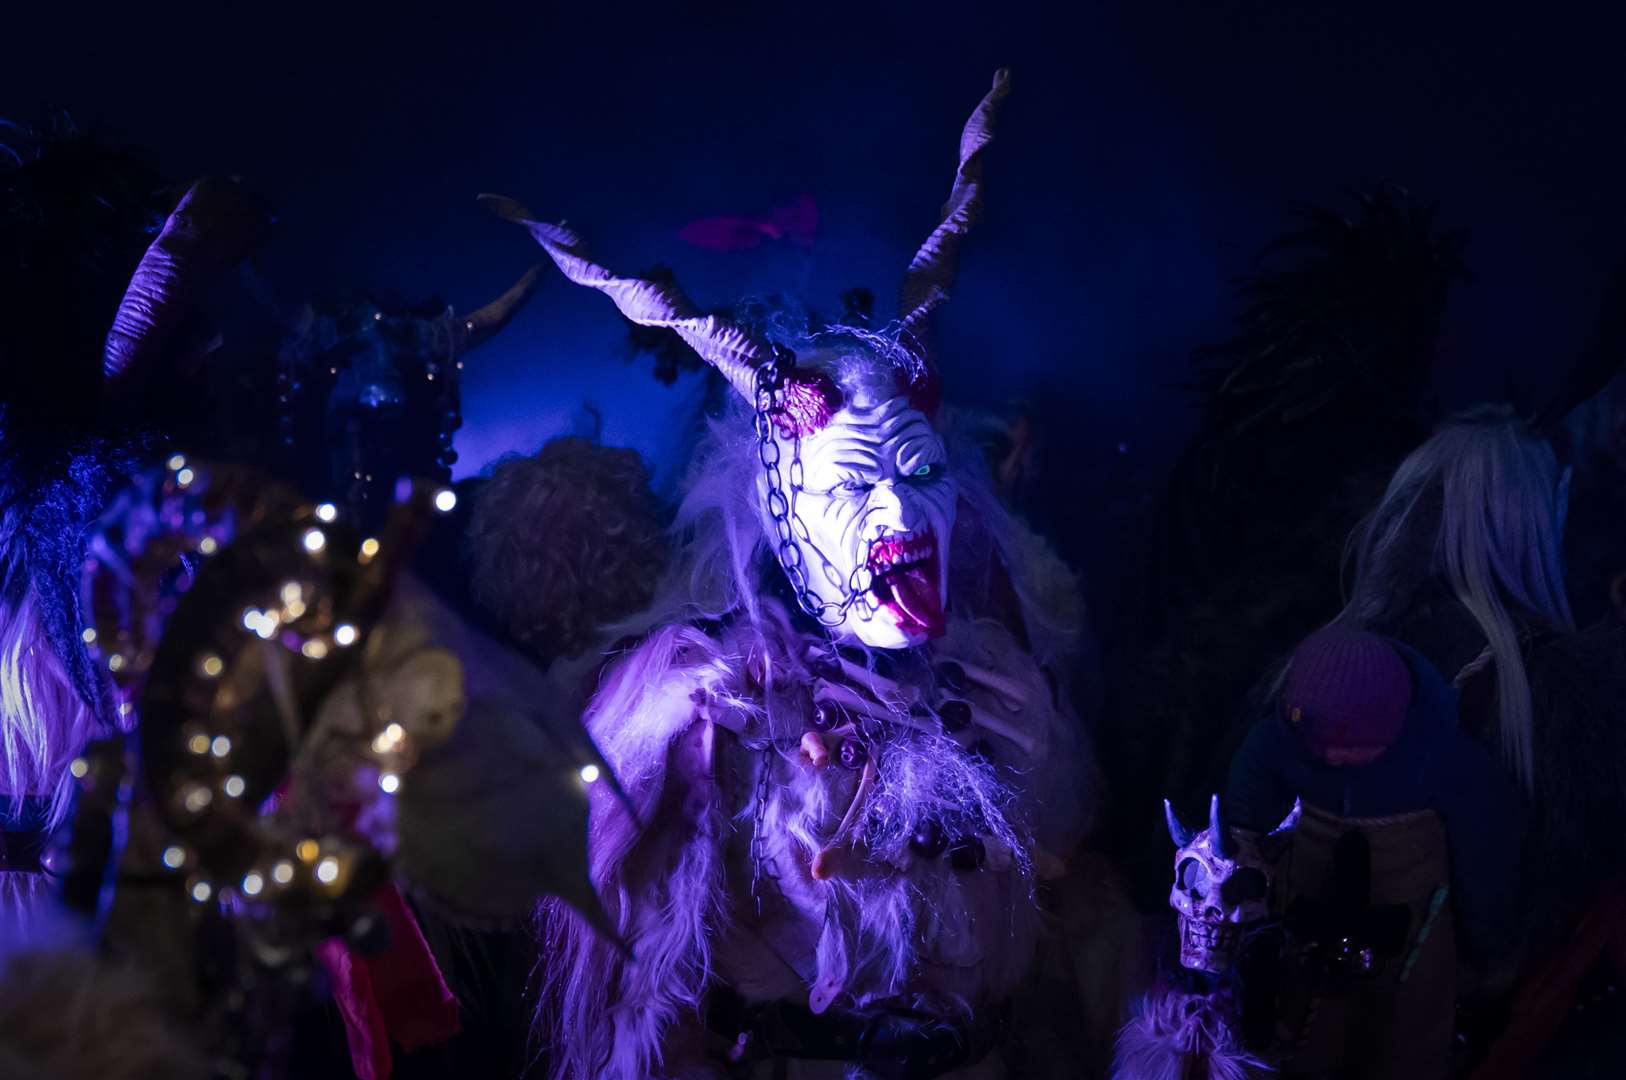 A creepy costumed figure during the Whitby Krampus Run in Whitby, Yorkshire, which celebrates the Krampus, a horned creature which accompanies Saint Nicholas on his rounds in December (PA)